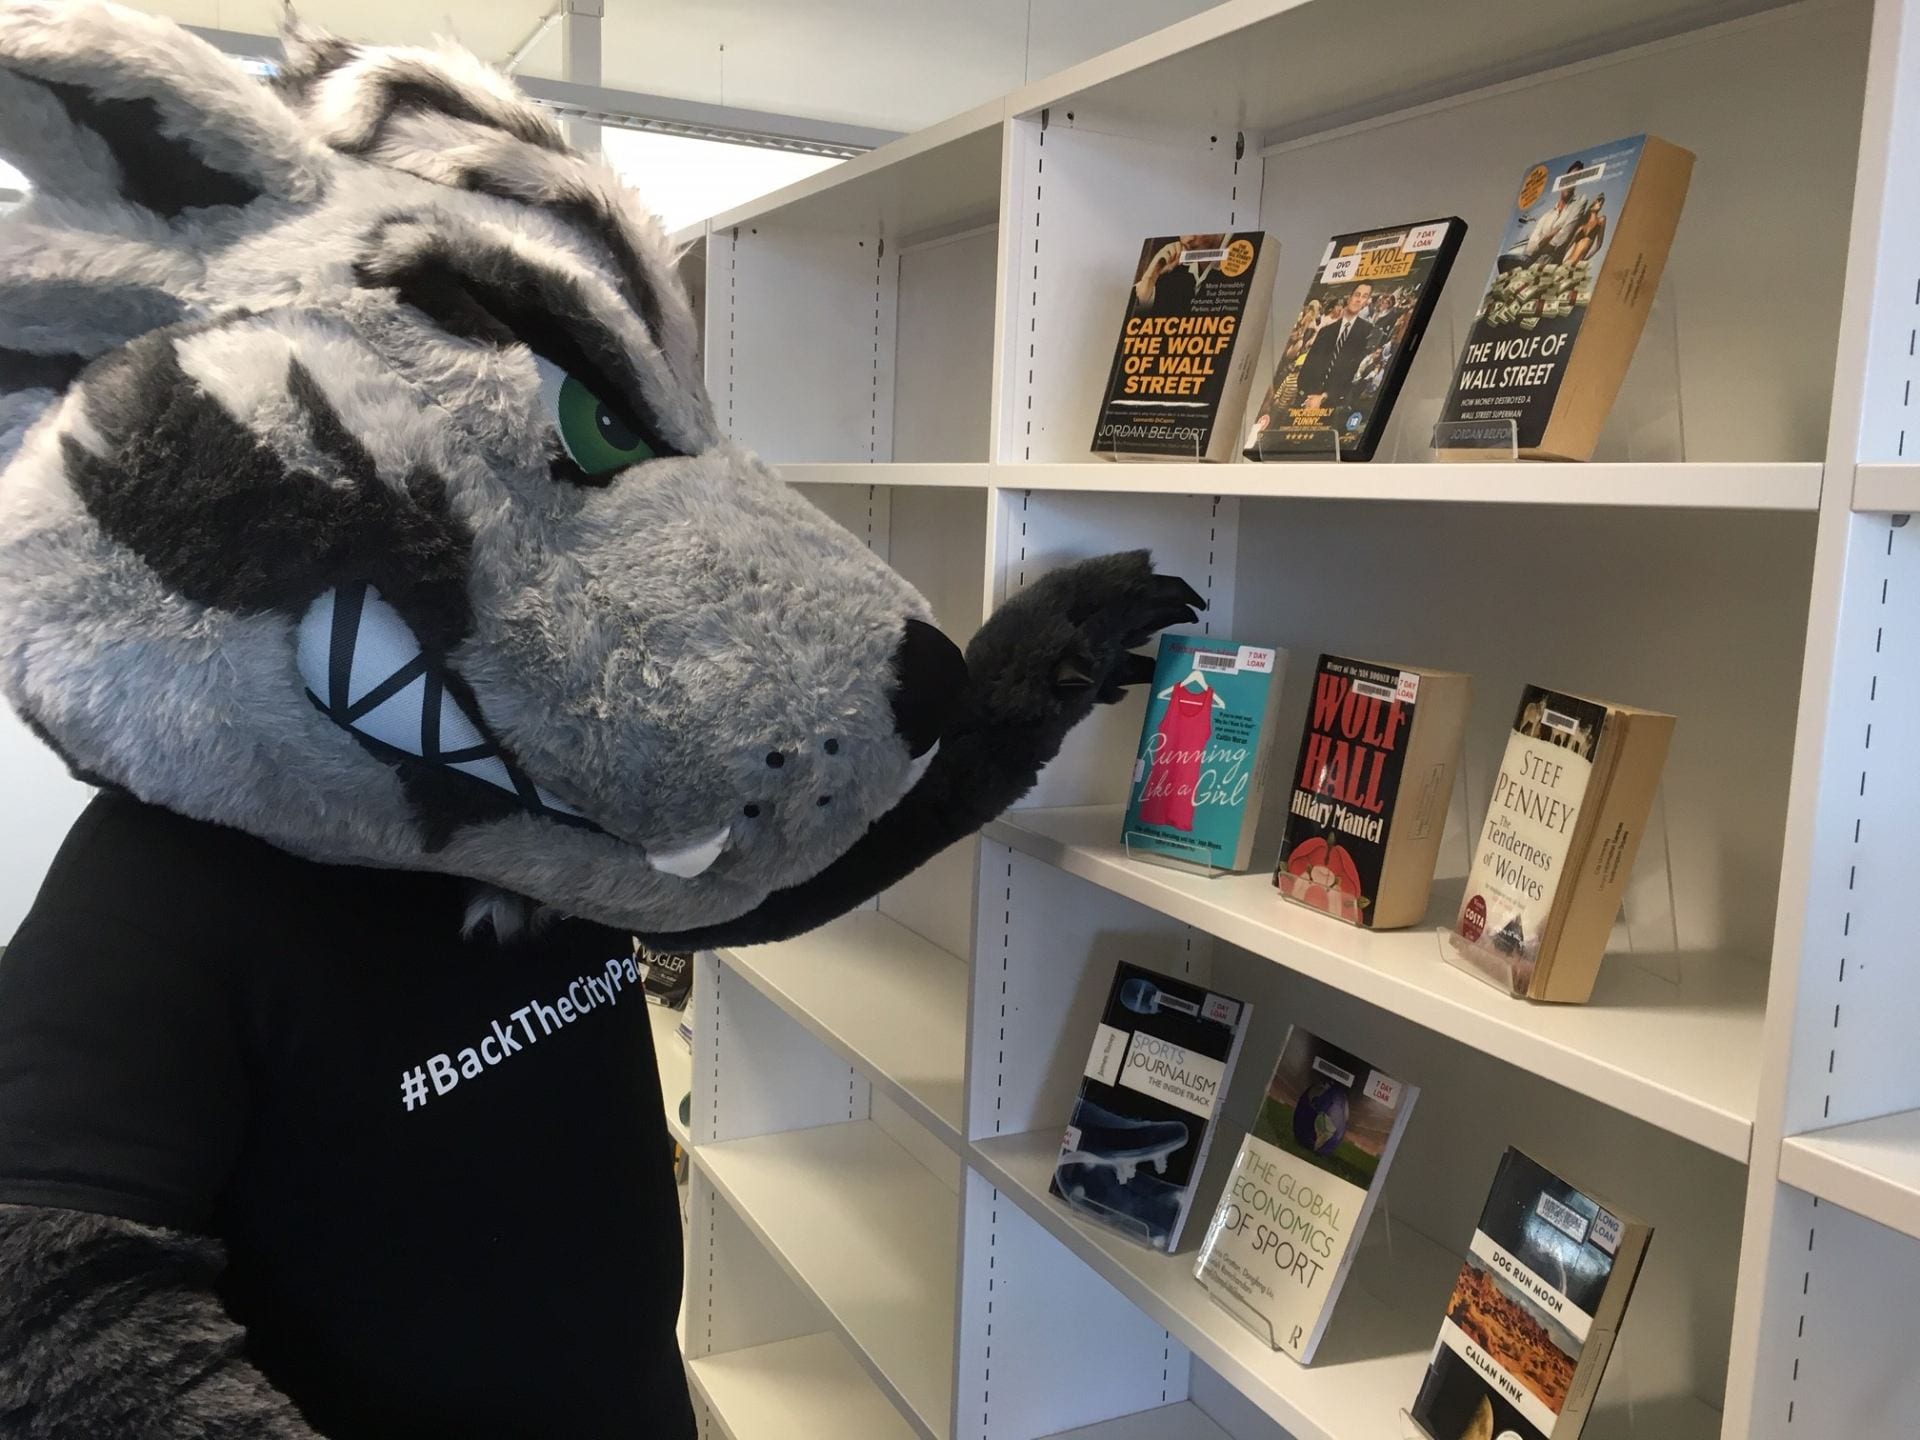 Image of CityWolf looking at books on Wolf-themed topics, e.g. Wolf Hall